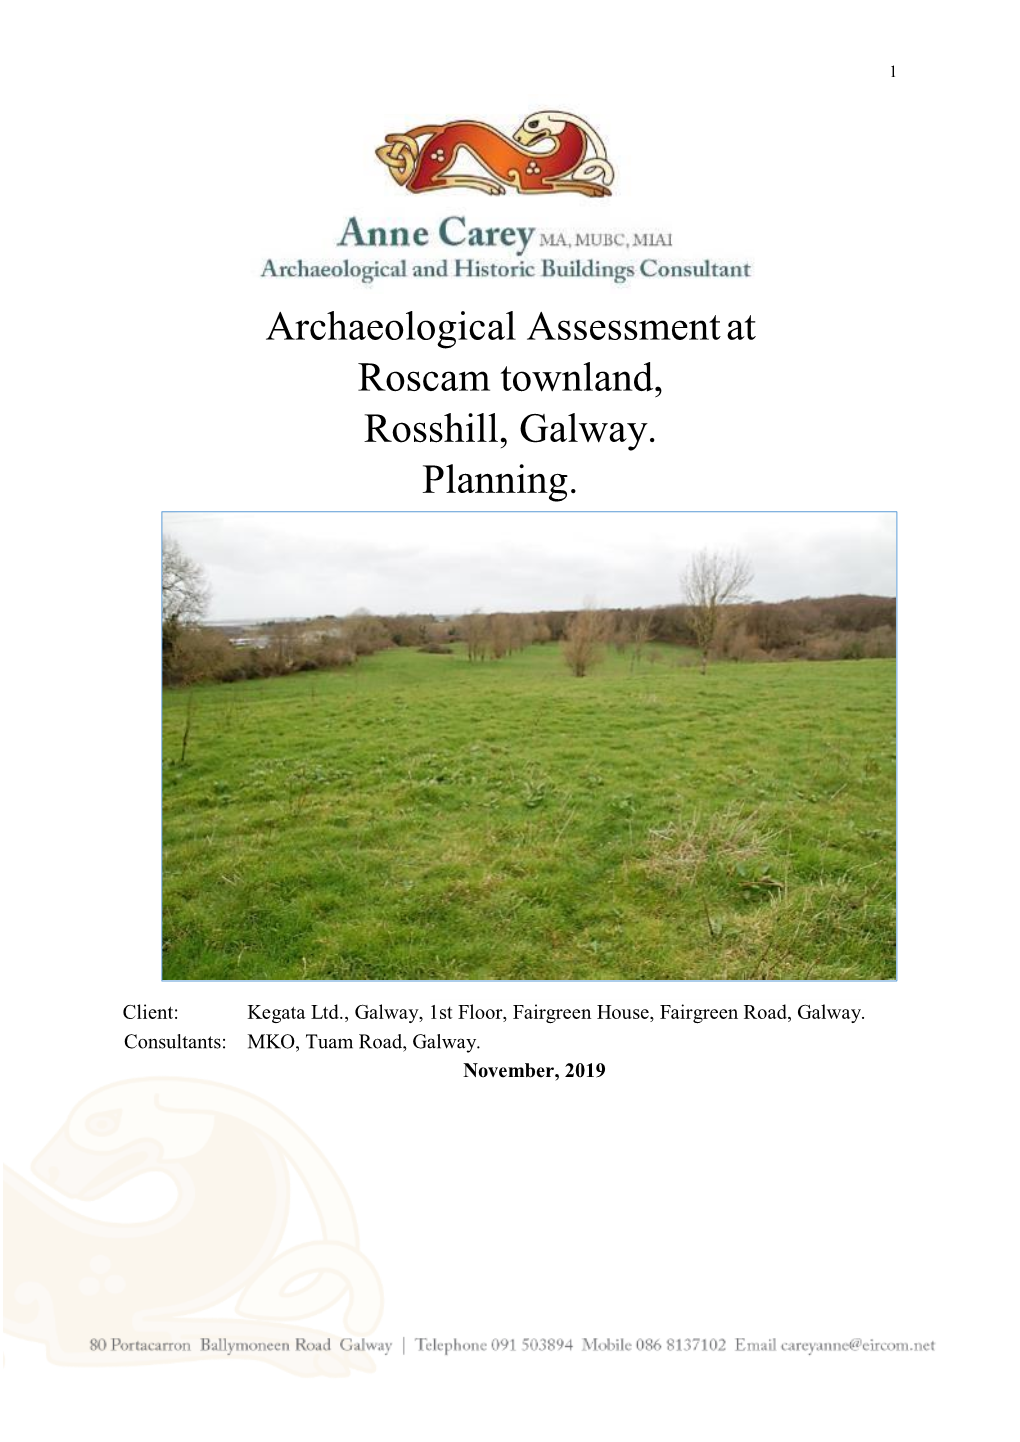 Archaeological Assessmentat Roscam Townland, Rosshill, Galway